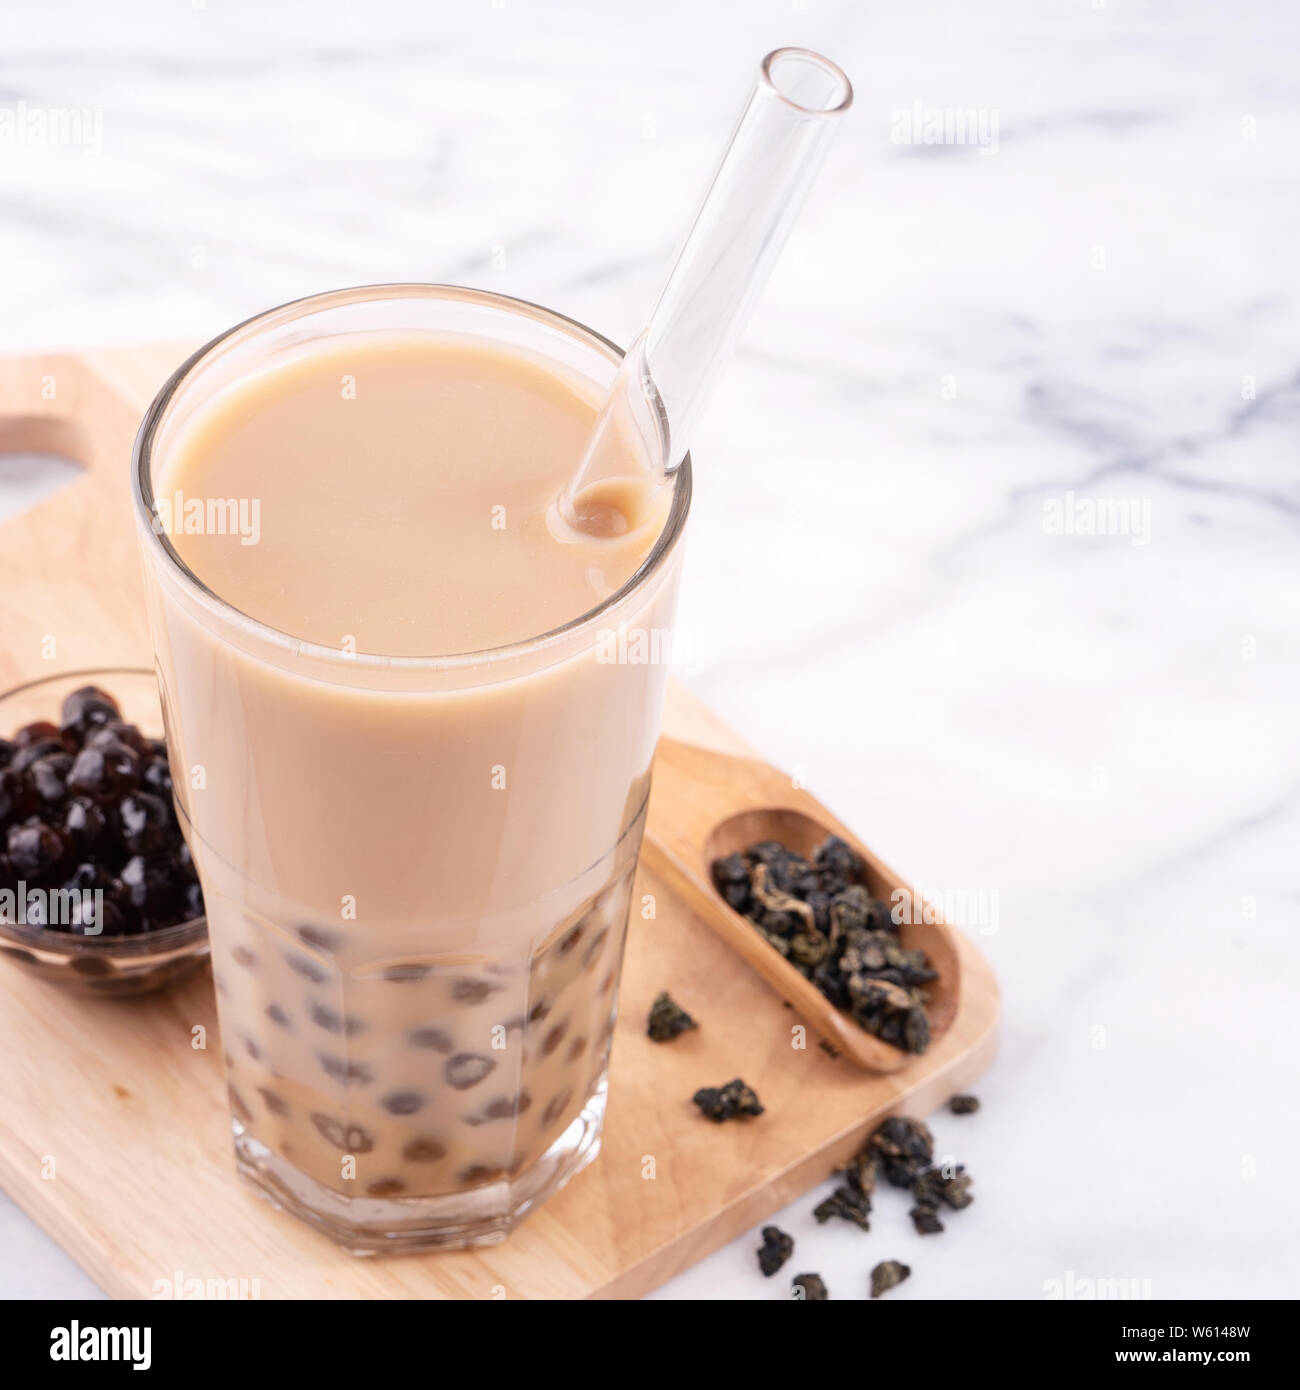 https://c8.alamy.com/comp/W6148W/tapioca-pearl-ball-bubble-milk-tea-popular-taiwan-drink-in-drinking-glass-with-straw-on-marble-white-table-and-wooden-tray-close-up-copy-space-W6148W.jpg